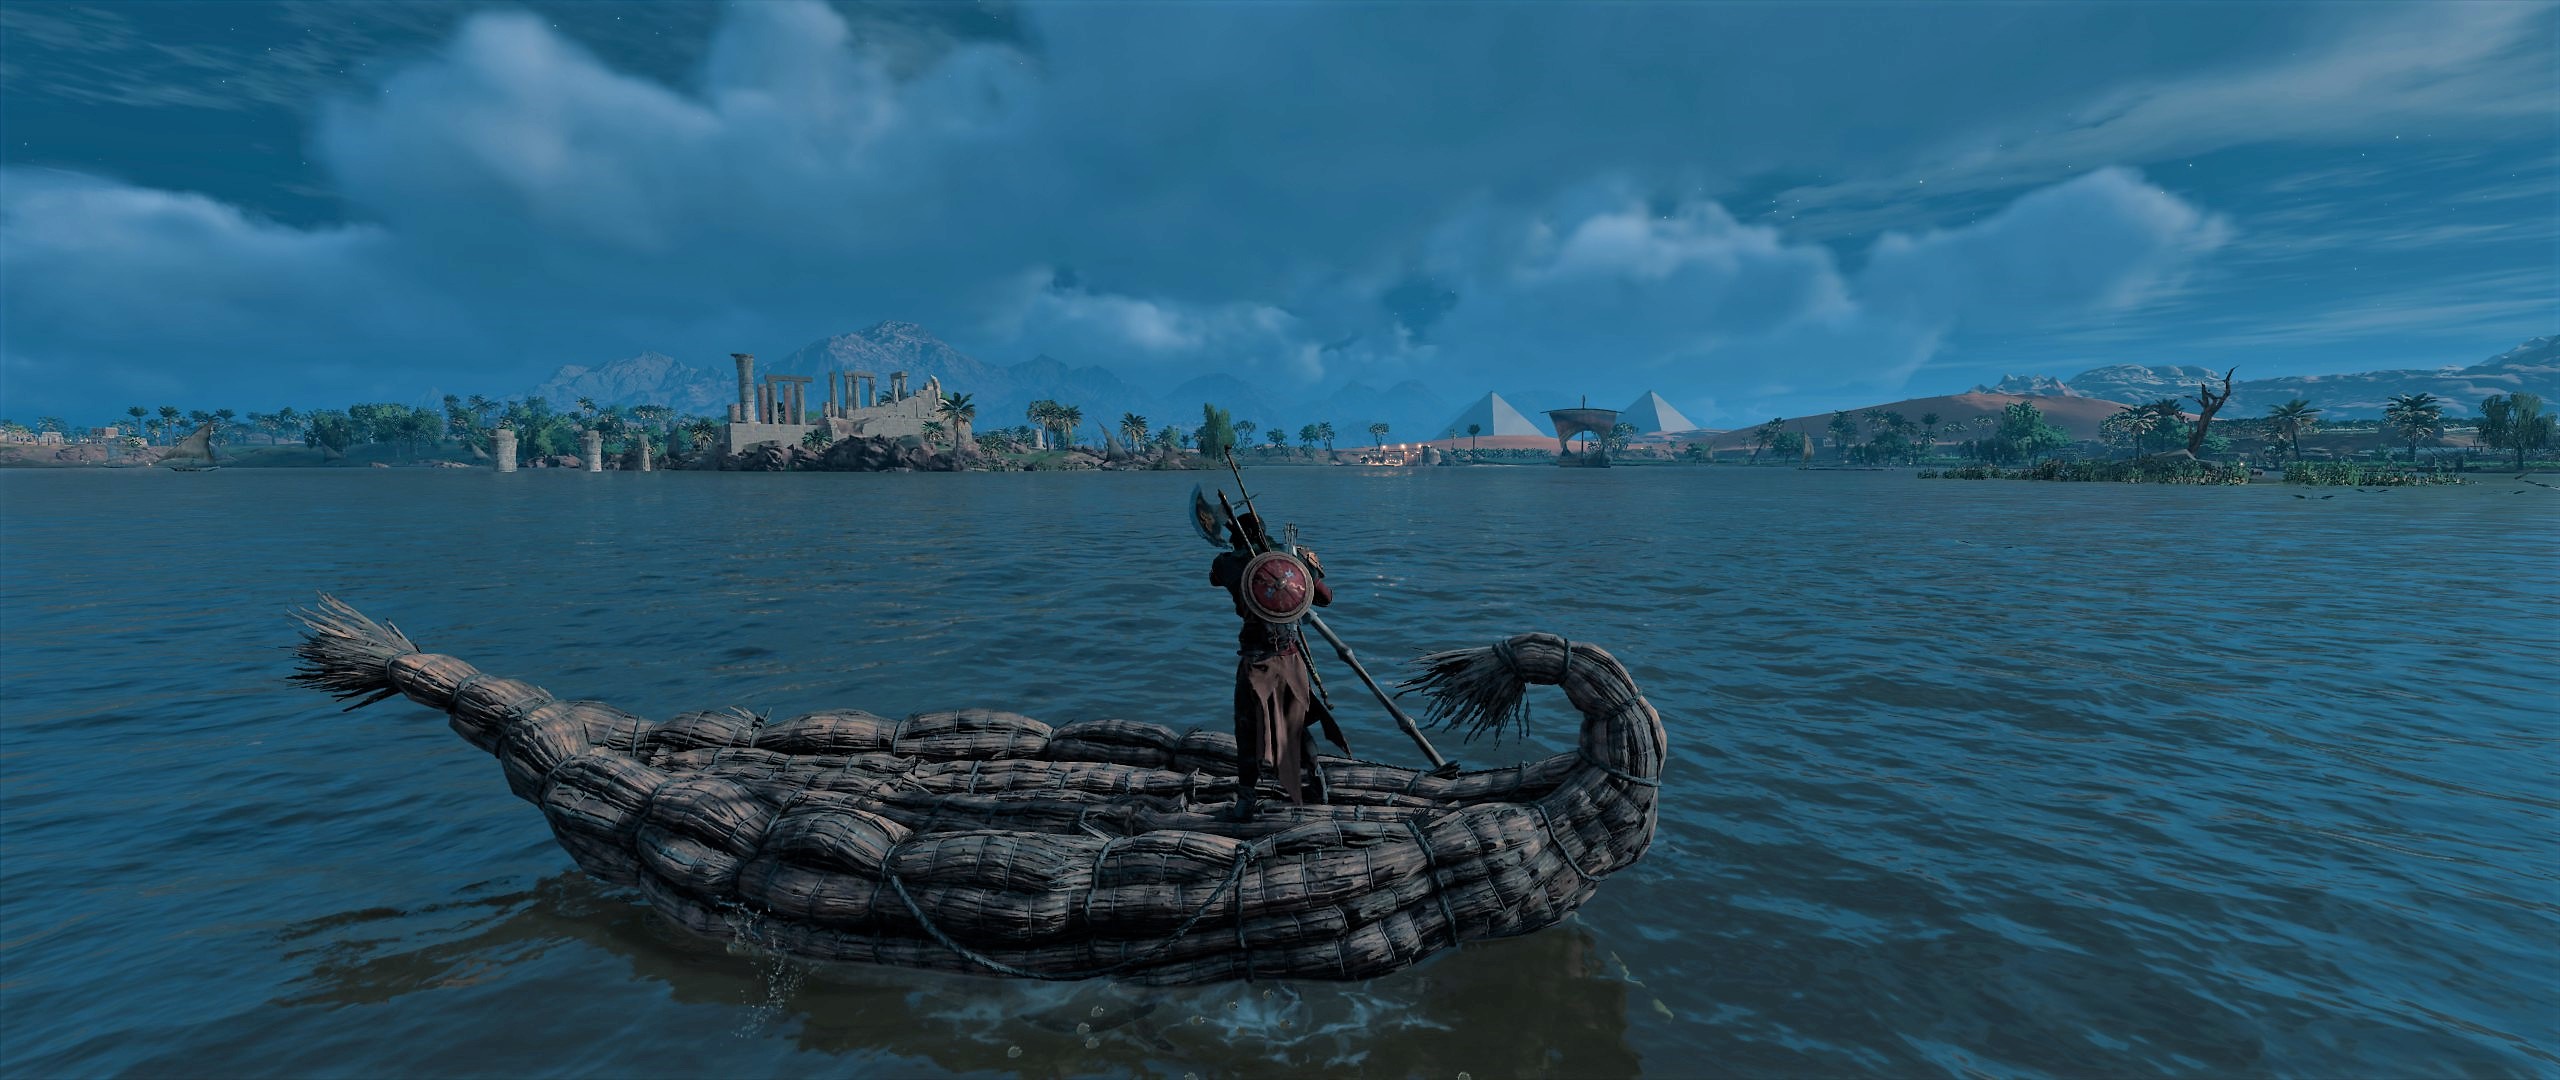 General 2560x1080 boat sailing water Assassin's Creed Assassin's Creed: Origins video games video game characters Ubisoft